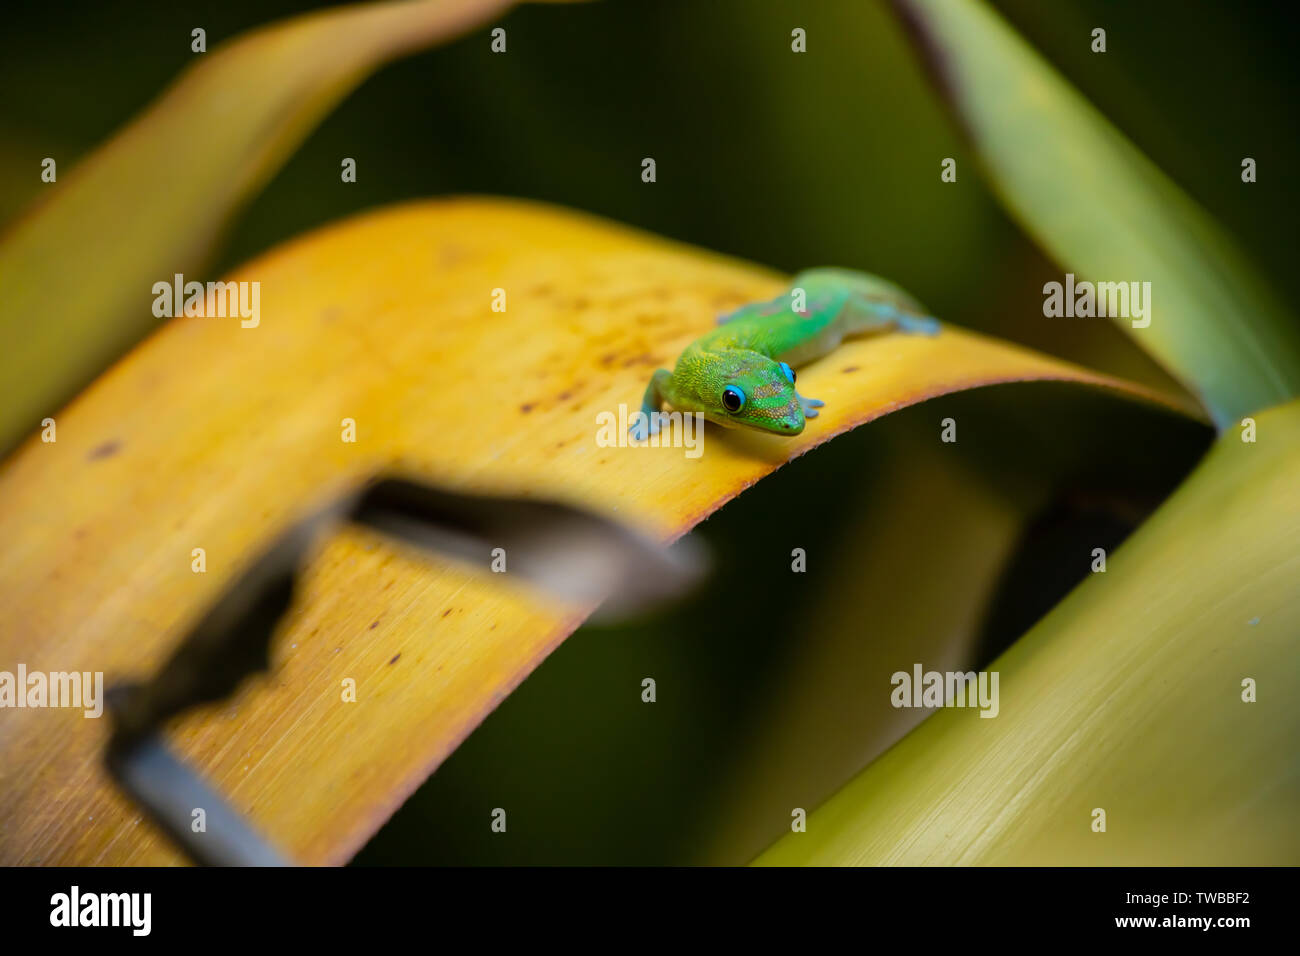 A small green gecko lizard on a yellow leaf in the tropical Hawaiian rain forest Stock Photo